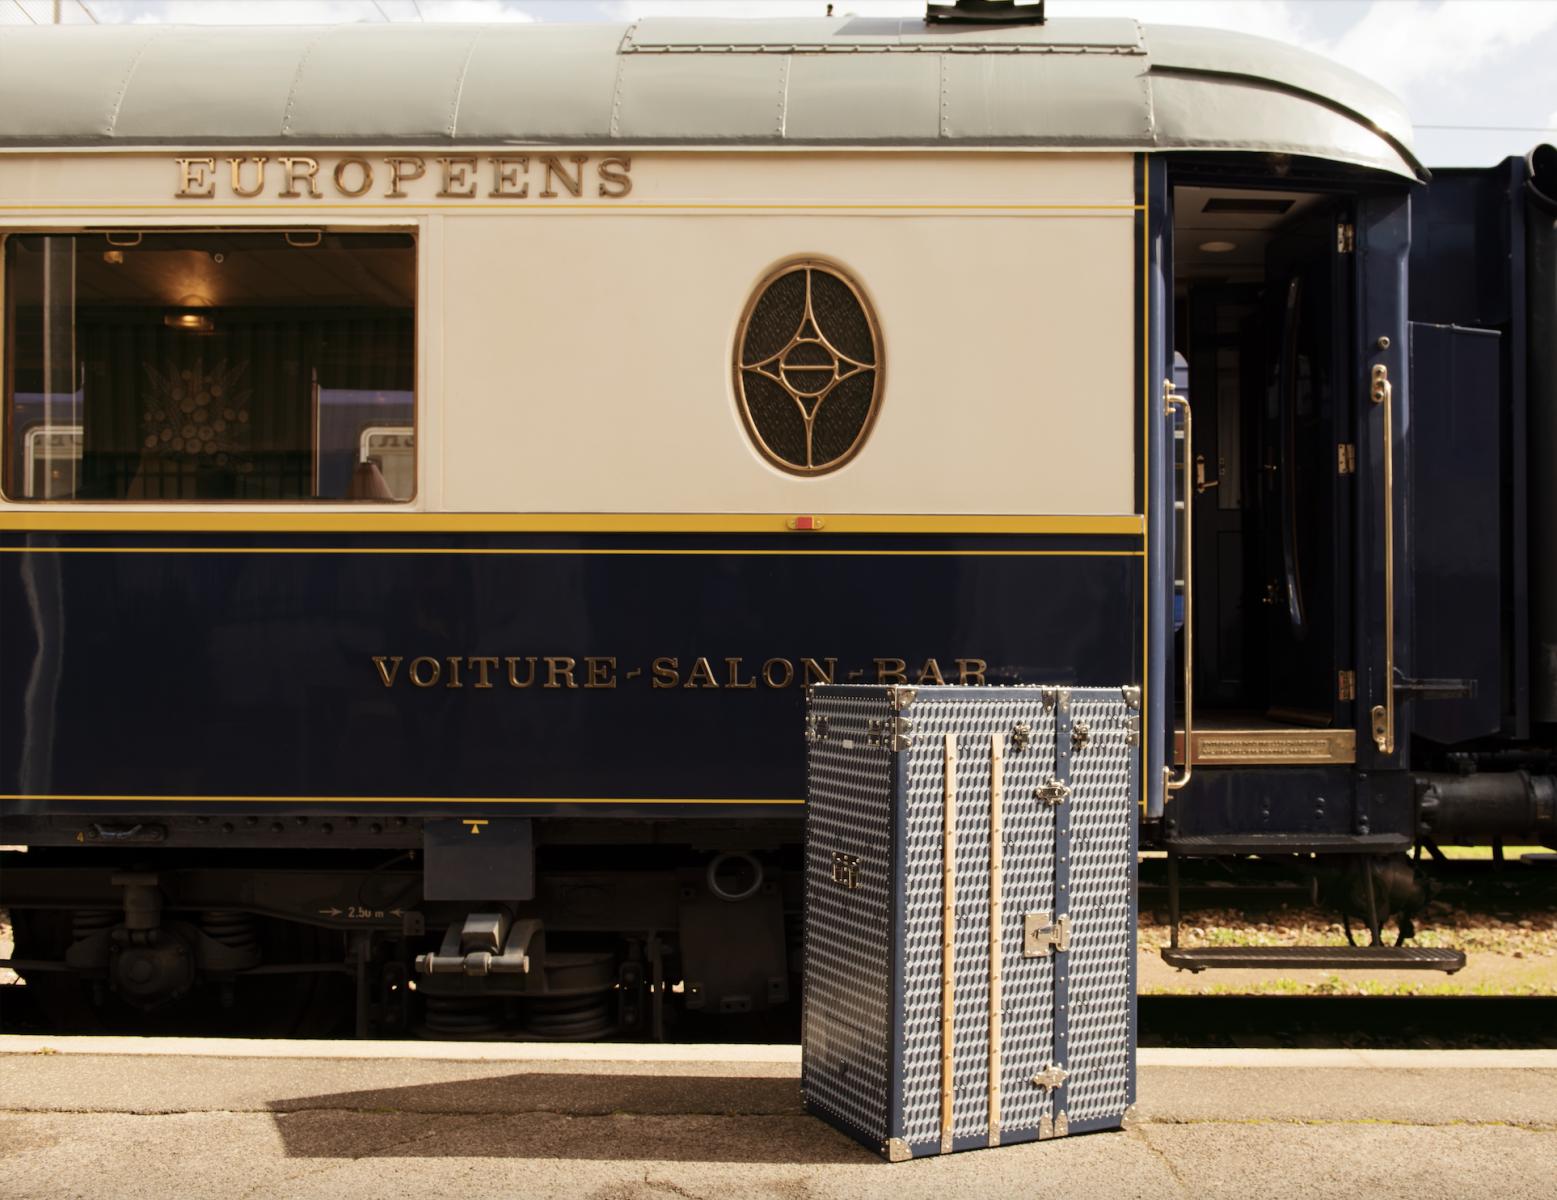 Orient Express | Artisan Of Travel Since 1883 | Luxury Trains And Hotels